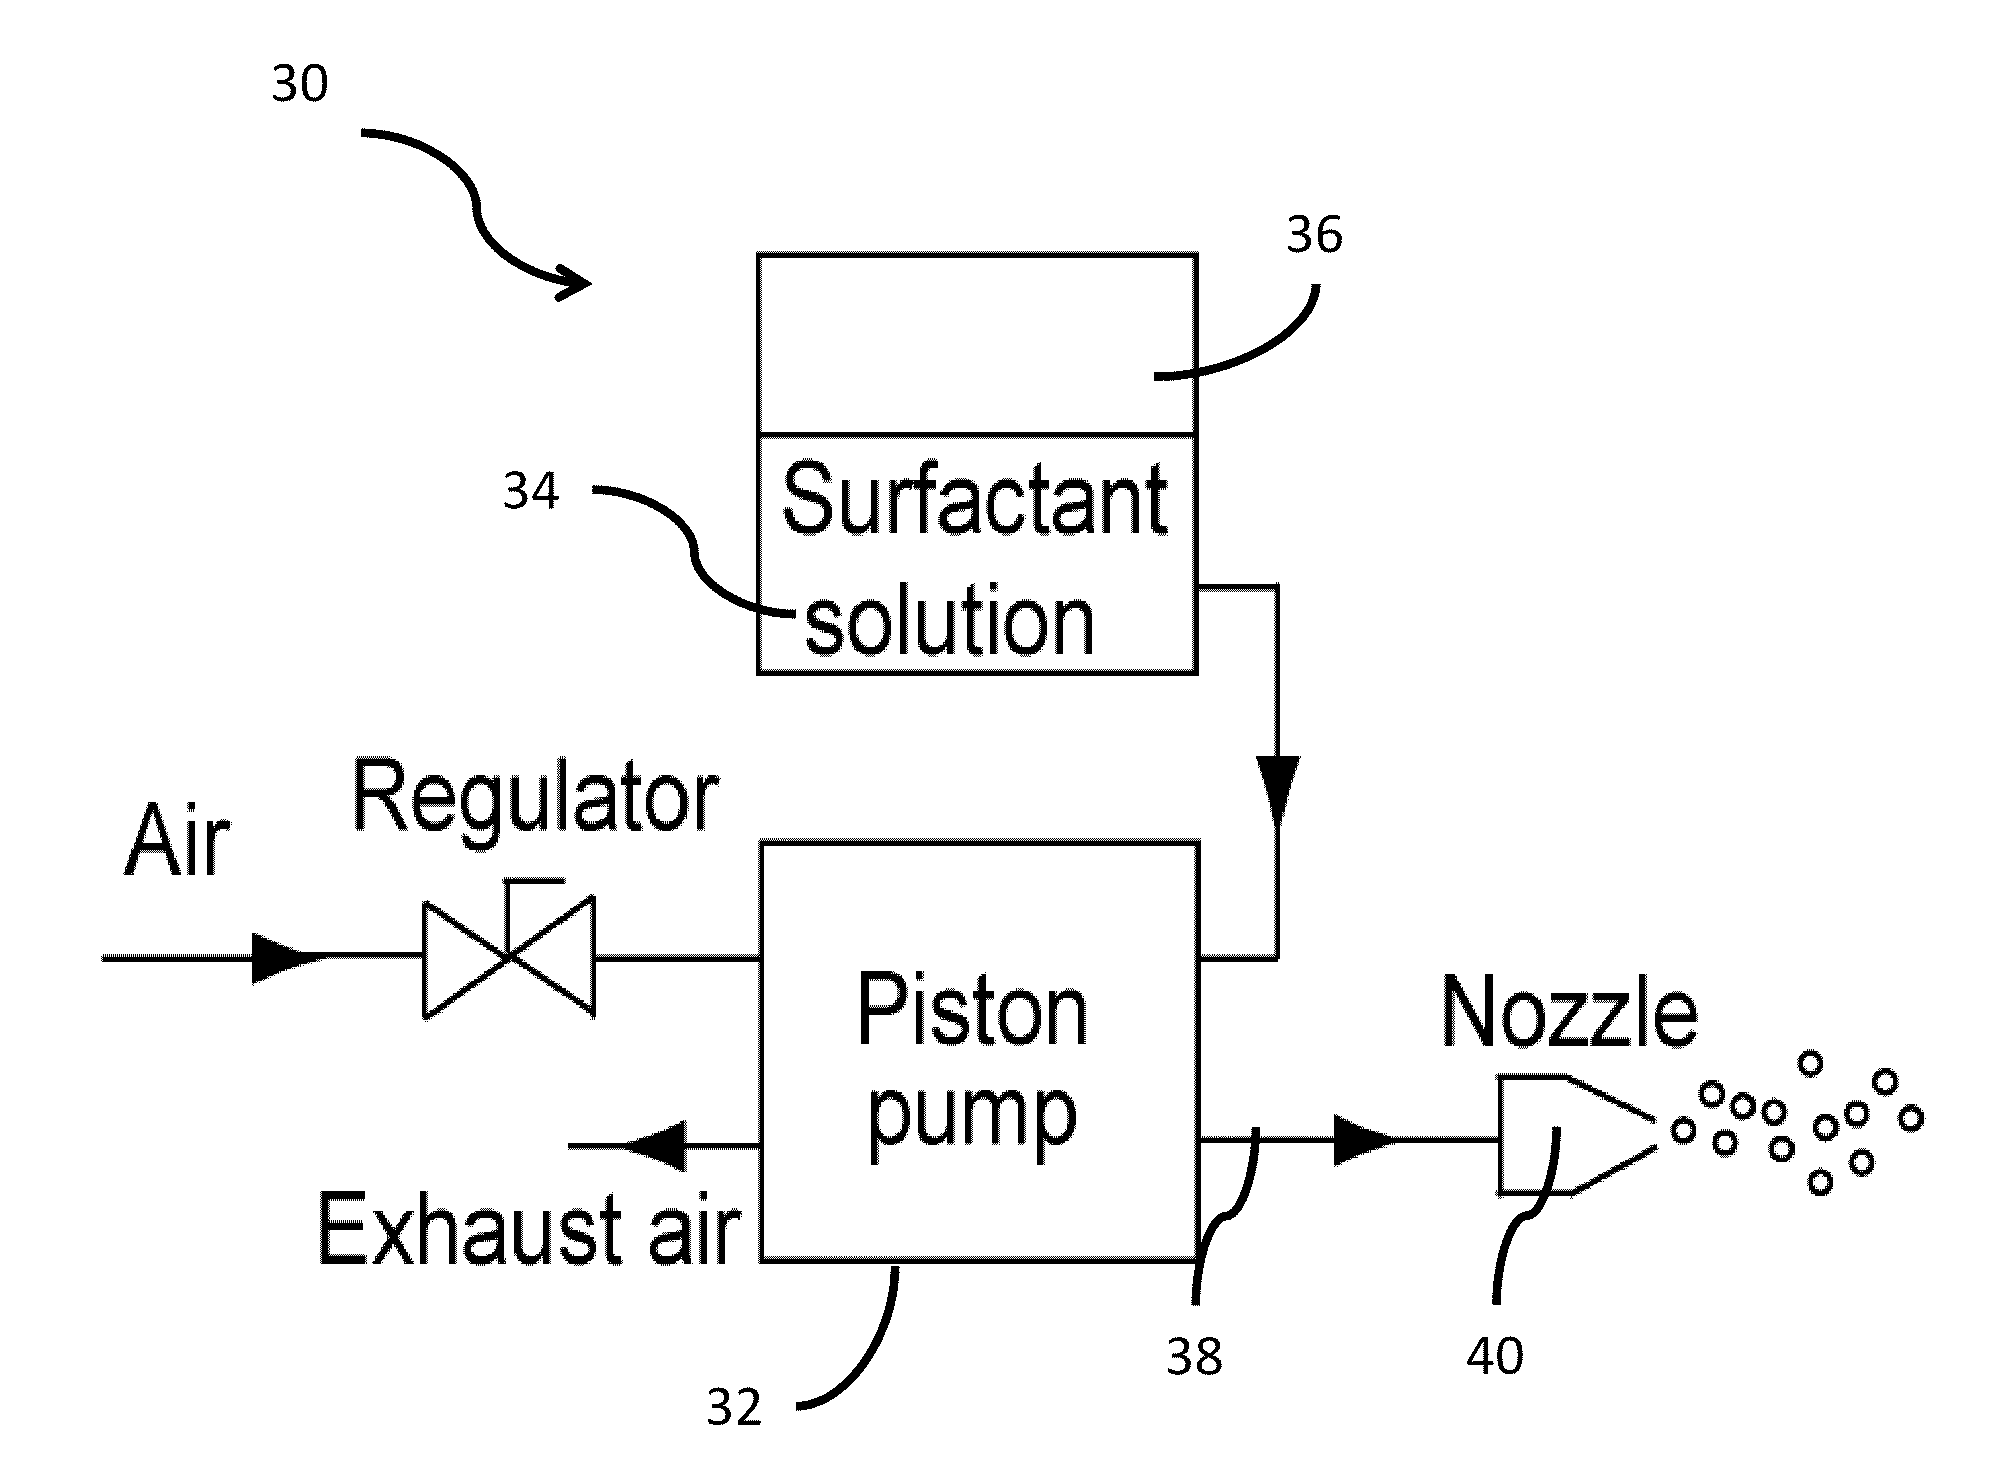 Method to generate micro scale gas filled liquid bubbles as tracer particles or inhaler mist for drug delivery